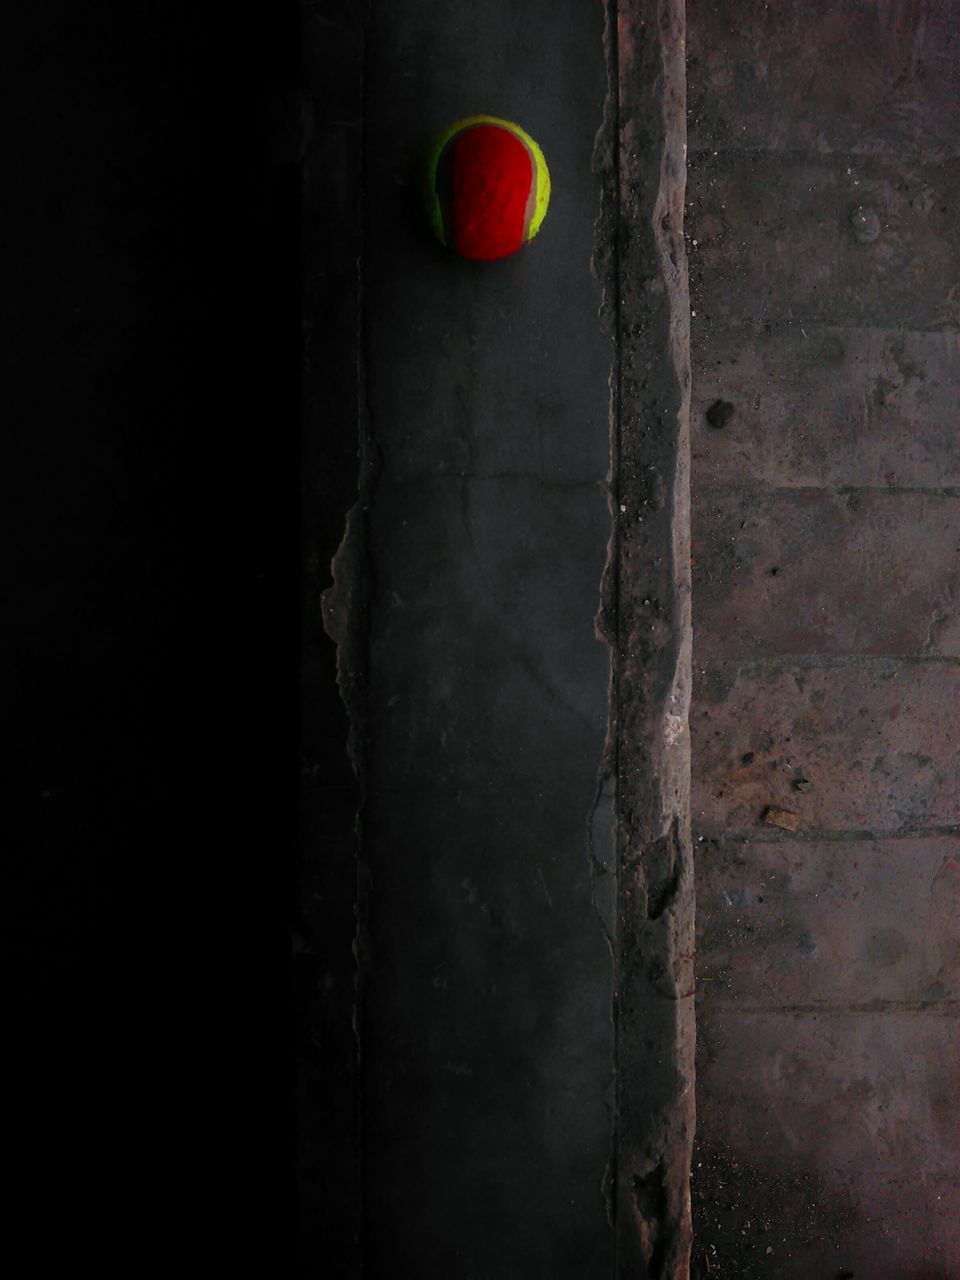 CLOSE-UP OF FRUITS ON WALL AGAINST DOOR